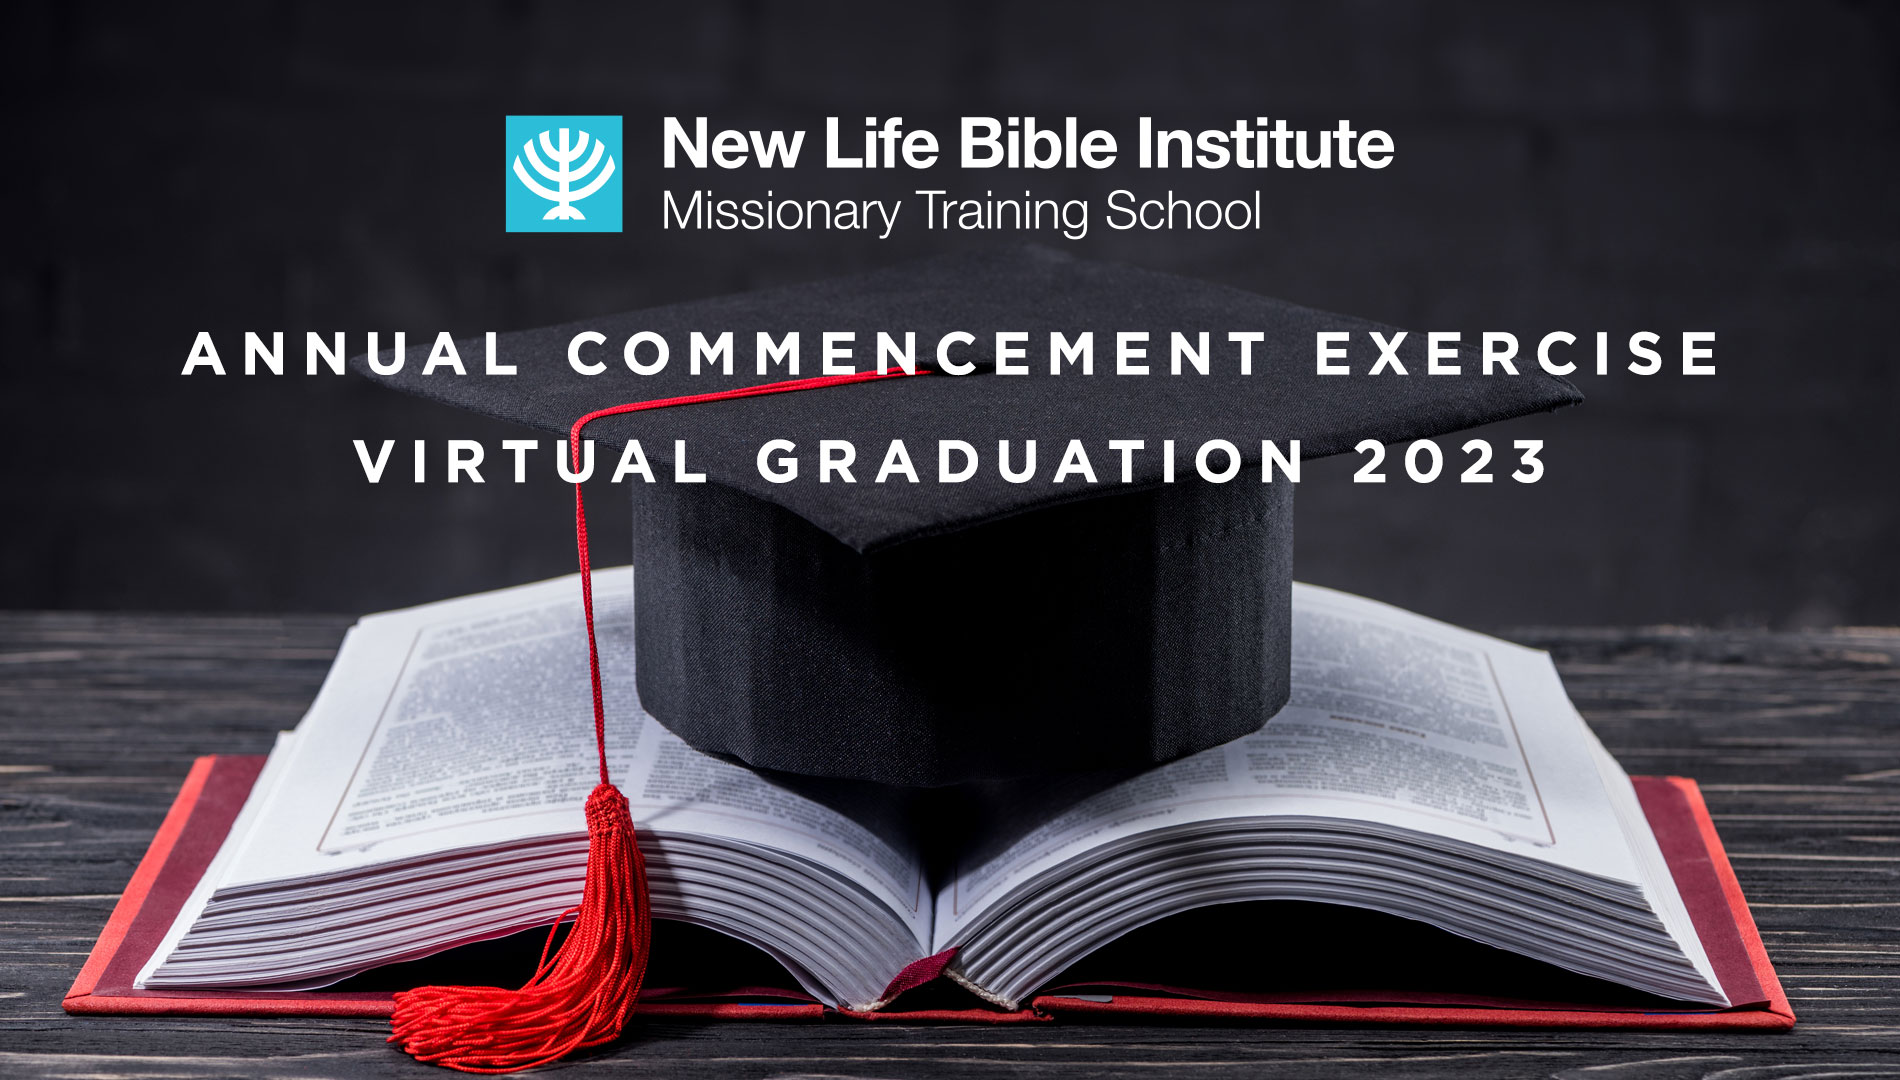 New Life Bible Institute Annual Commencement Exercise Virtual Graduation 2023